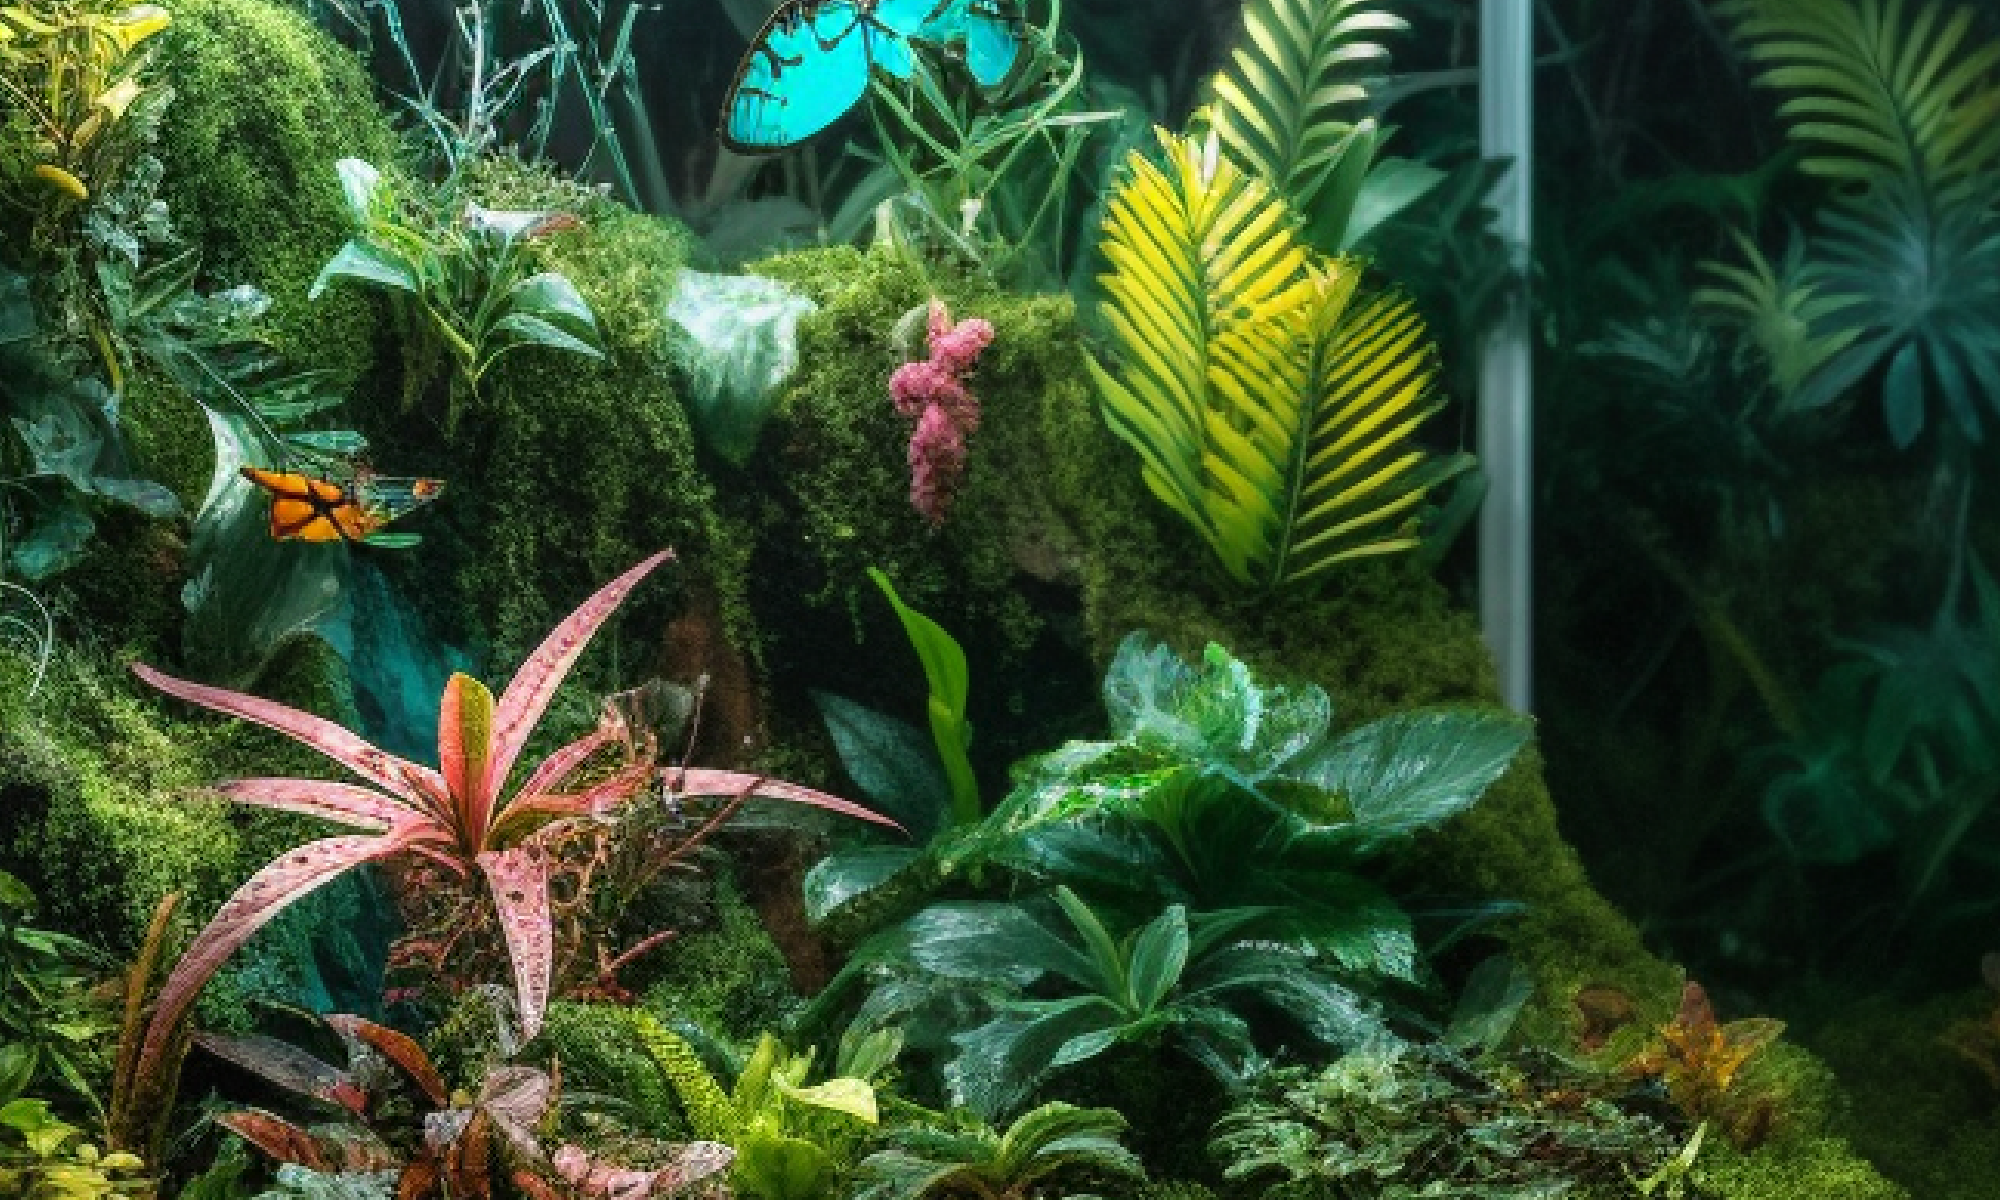 Fully bioactive terrariums with flowers, butterflies, plants in a forest and tropical setting